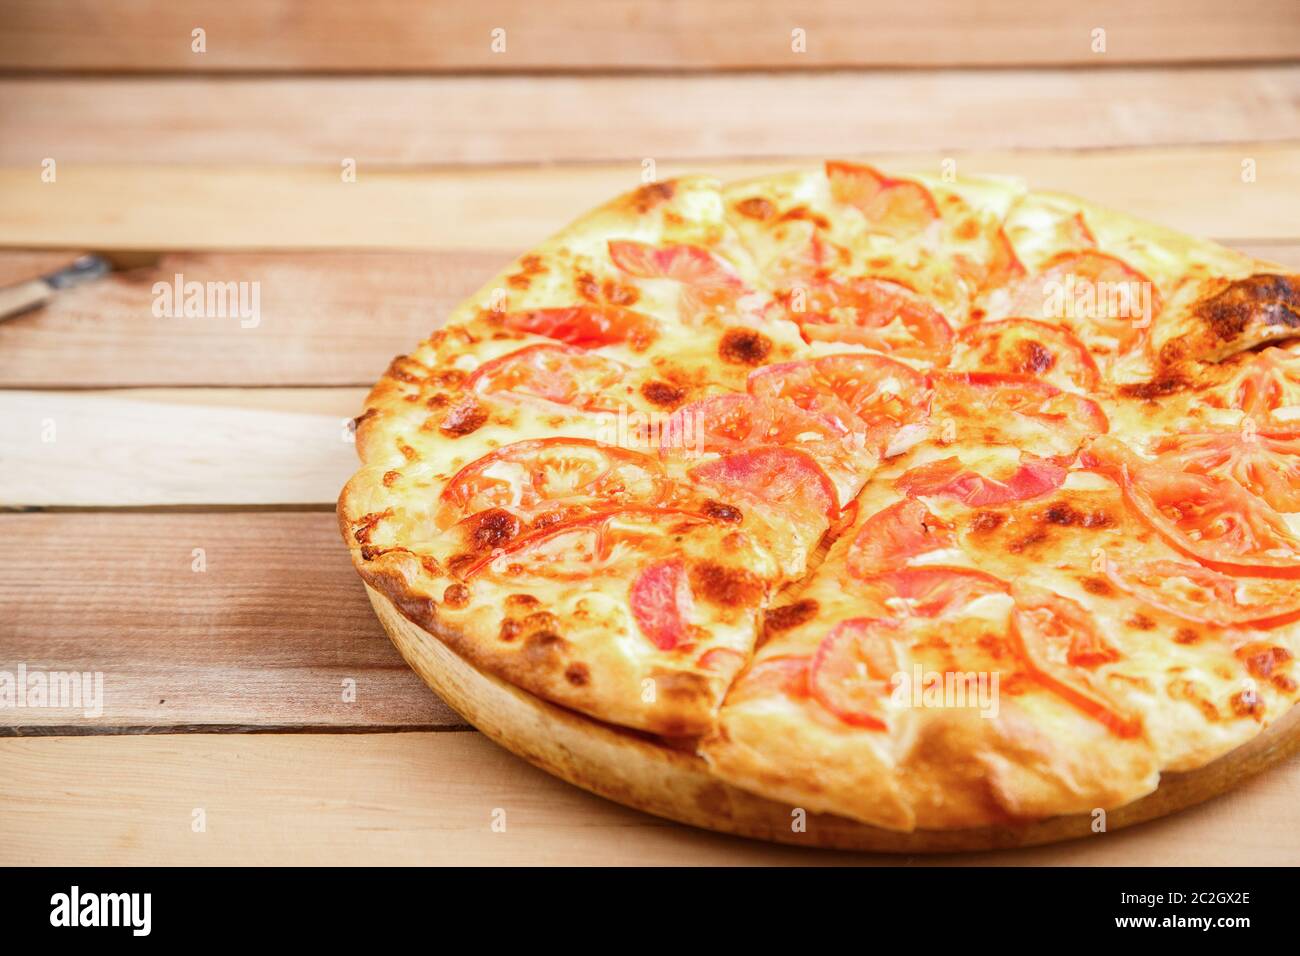 medium-sized pizza with tomatoes on a wooden tray Stock Photo